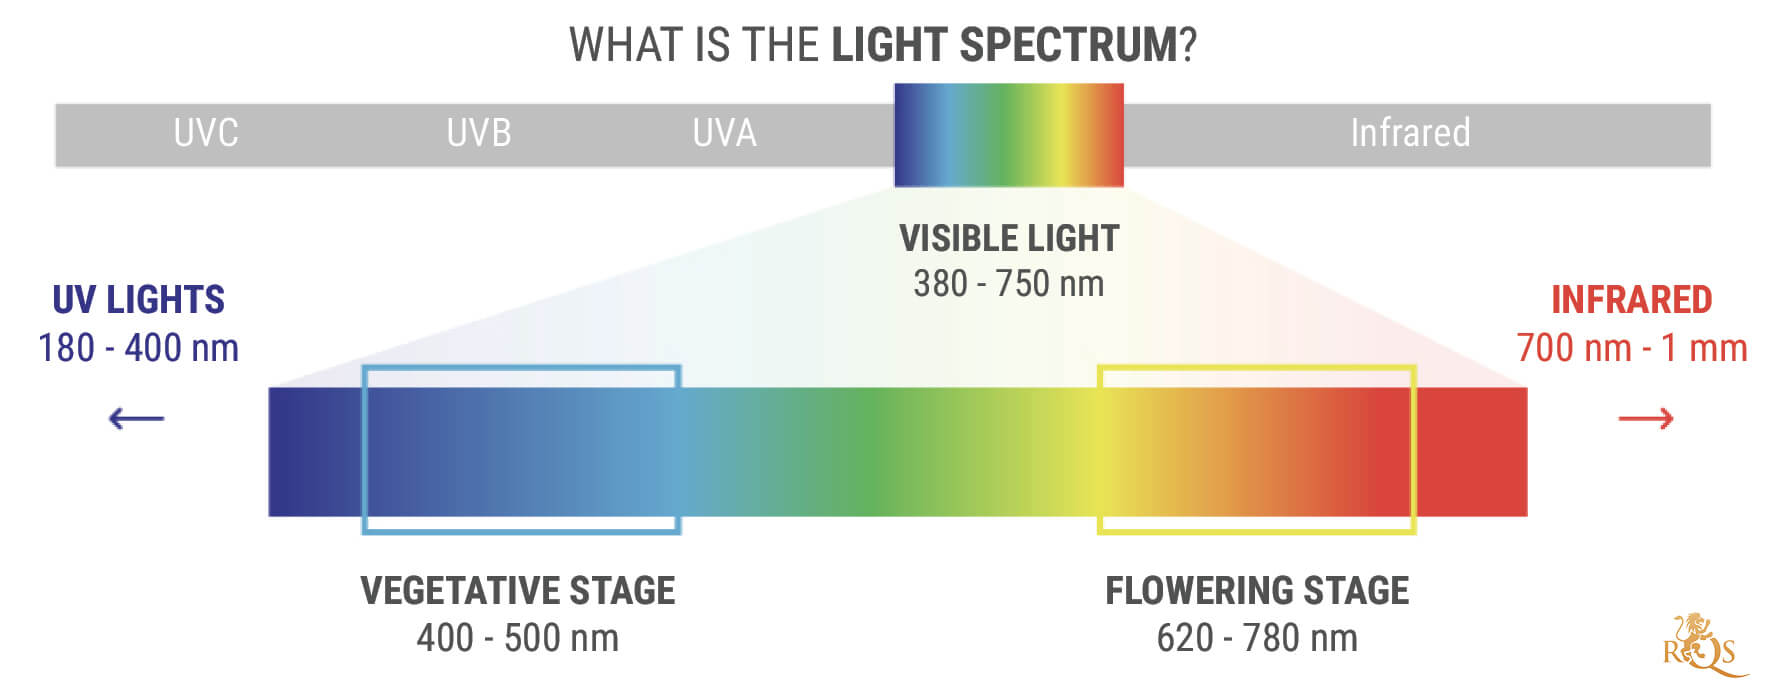 What Is The Light Spectrum?